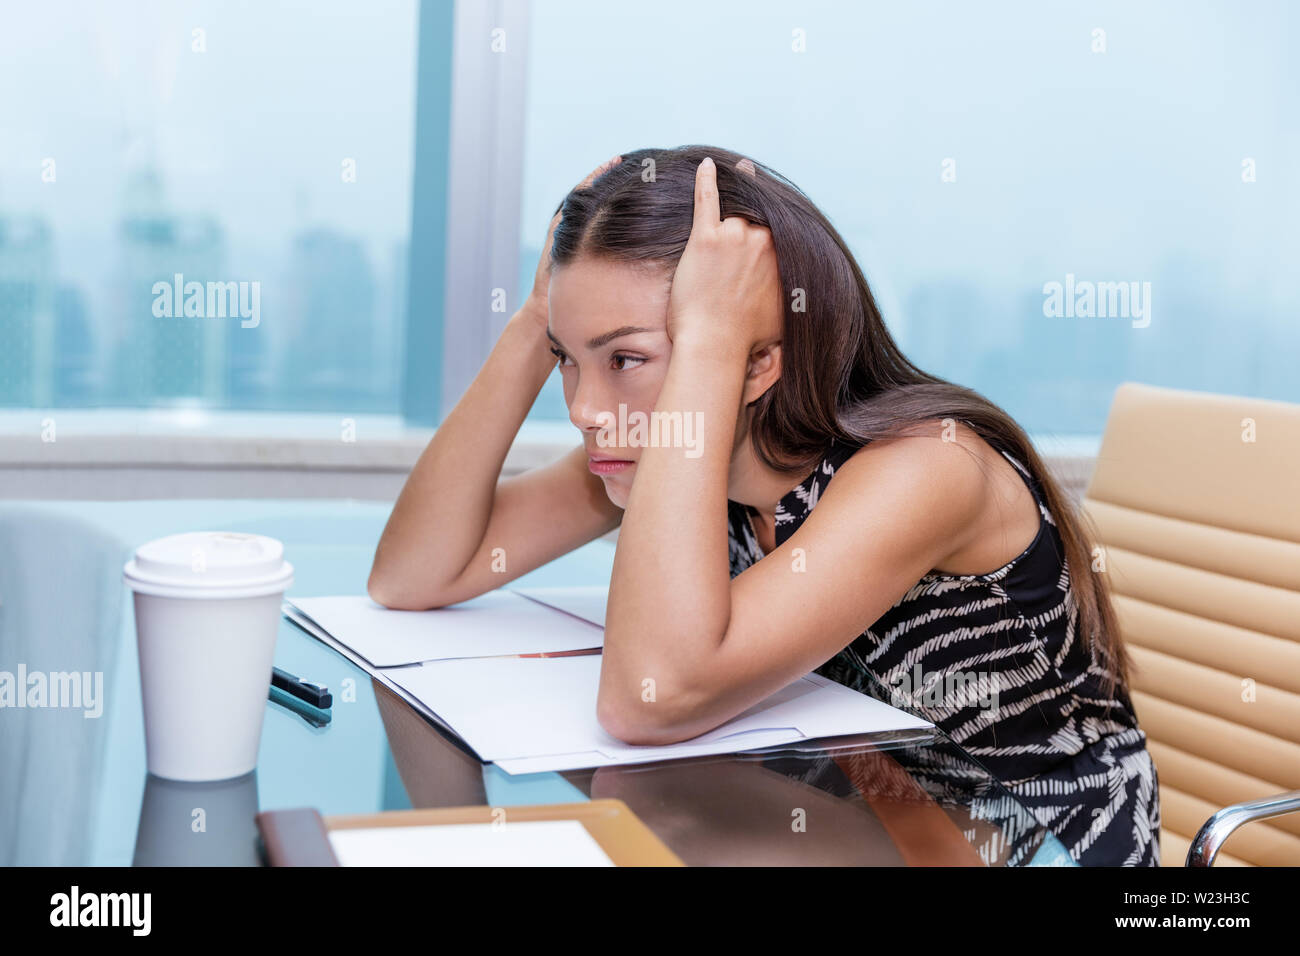 Stressed business woman at office desk stressing about work. Negative concept, headache, migraine. Tired businesswoman sitting thinking about problems and showing dissatisfaction of career. Stock Photo